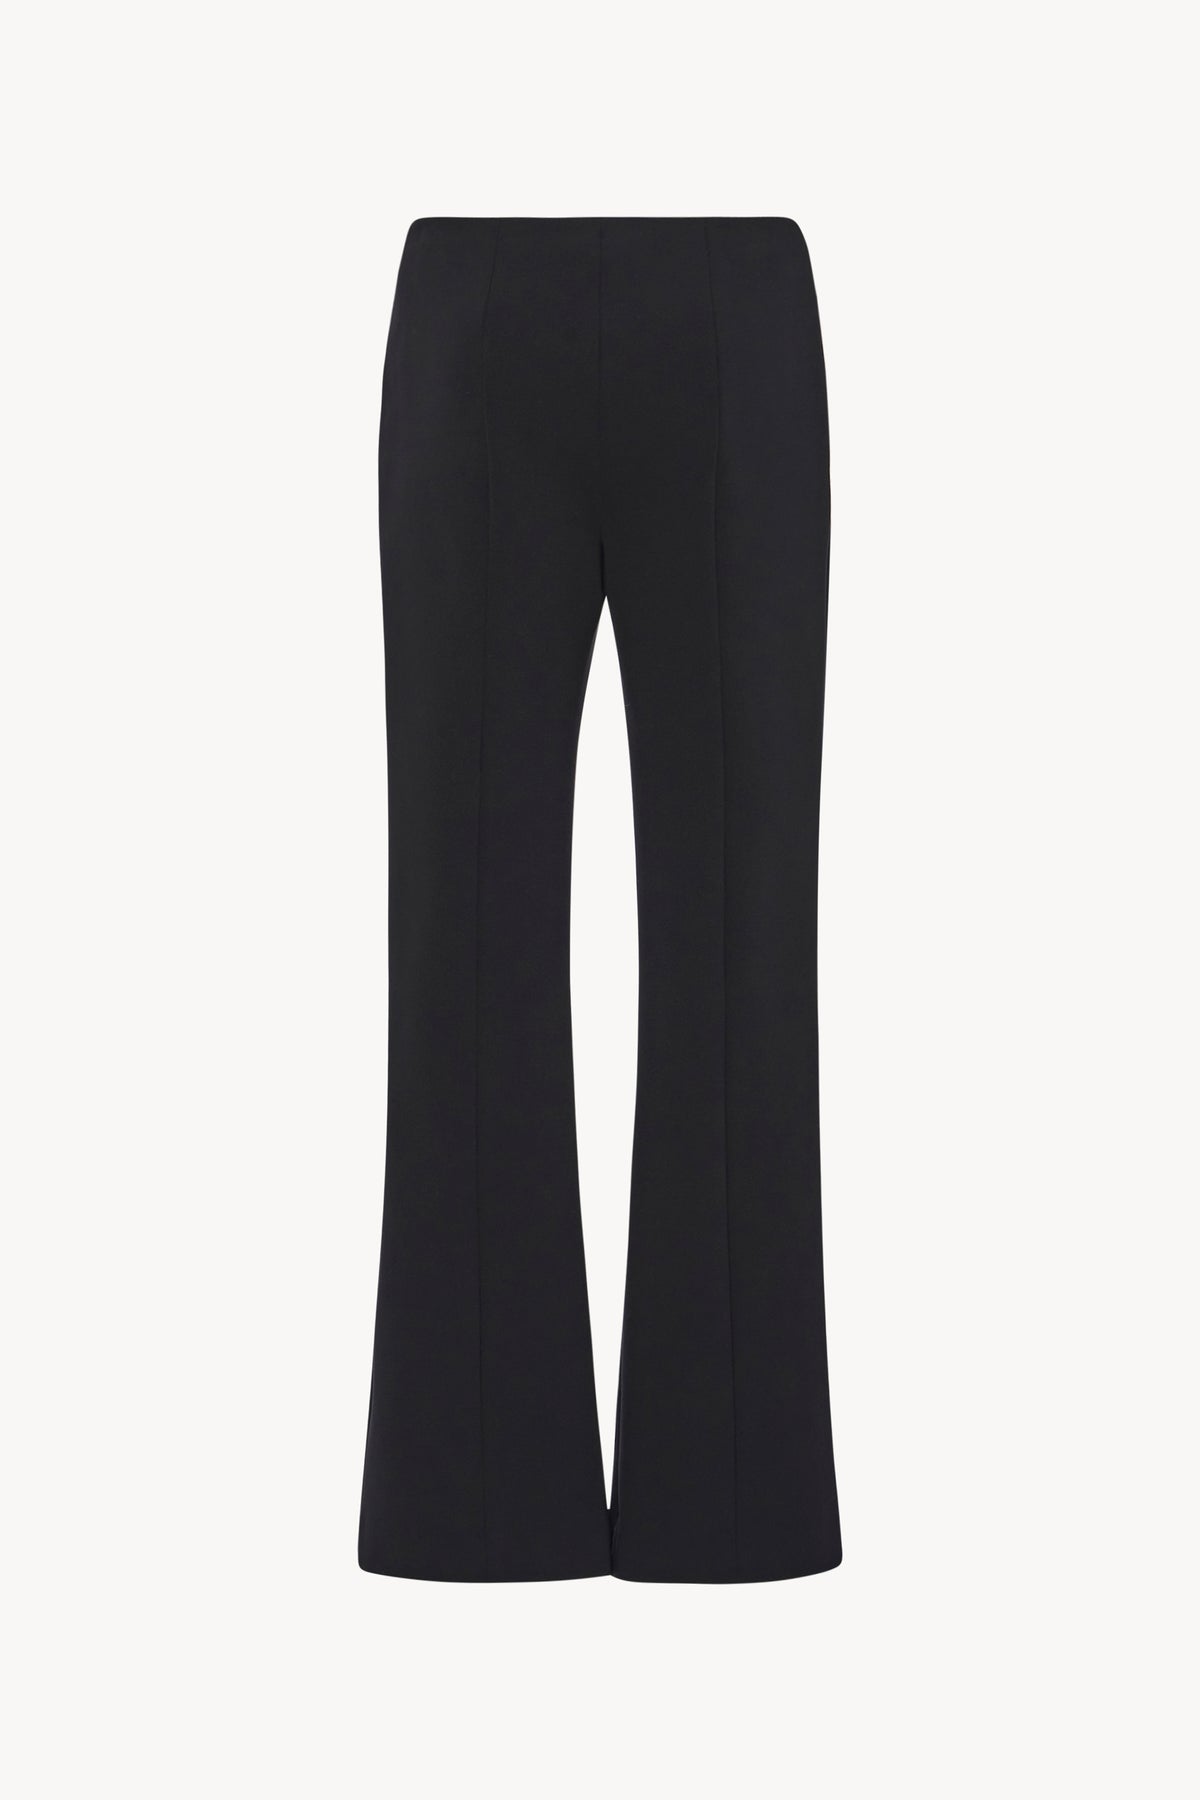 Beca Pant Black in Scuba – The Row